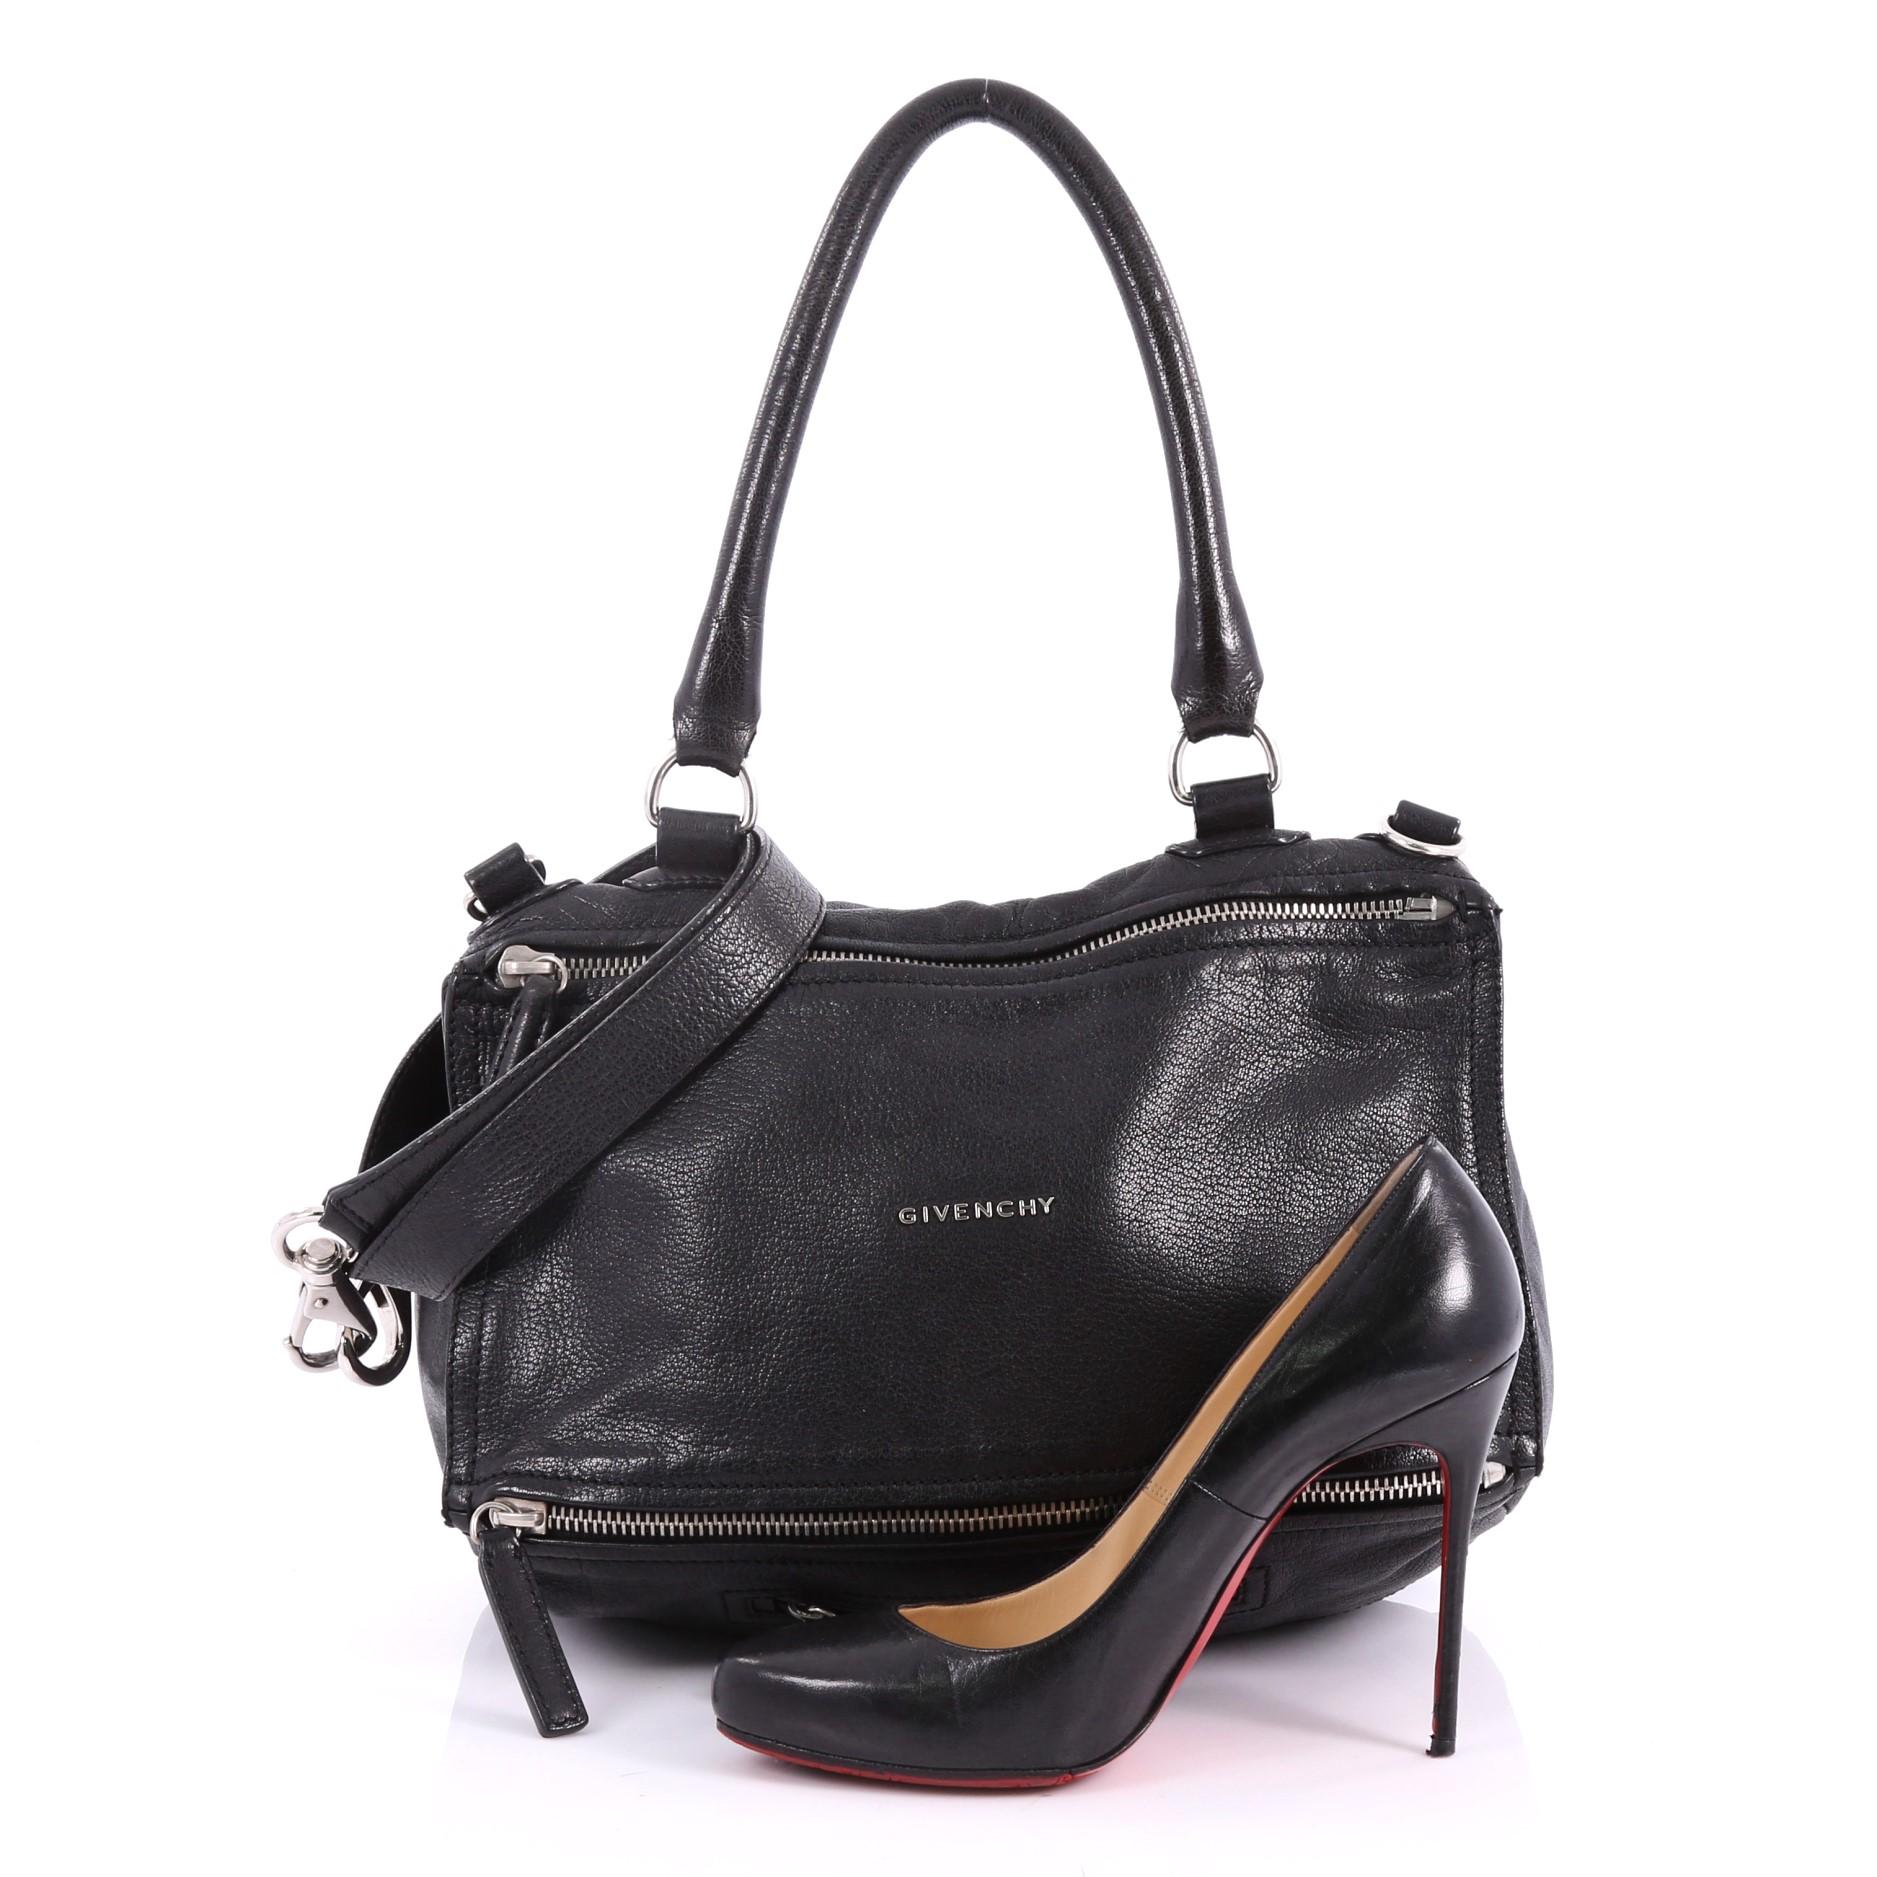 This authentic Givenchy Pandora Bag Leather Medium is the perfect companion for any on-the-go fashionista. Crafted from black leather, this edgy cult-favorite satchel features a pandora box-inspired silhouette, a singular top handle, an exterior zip